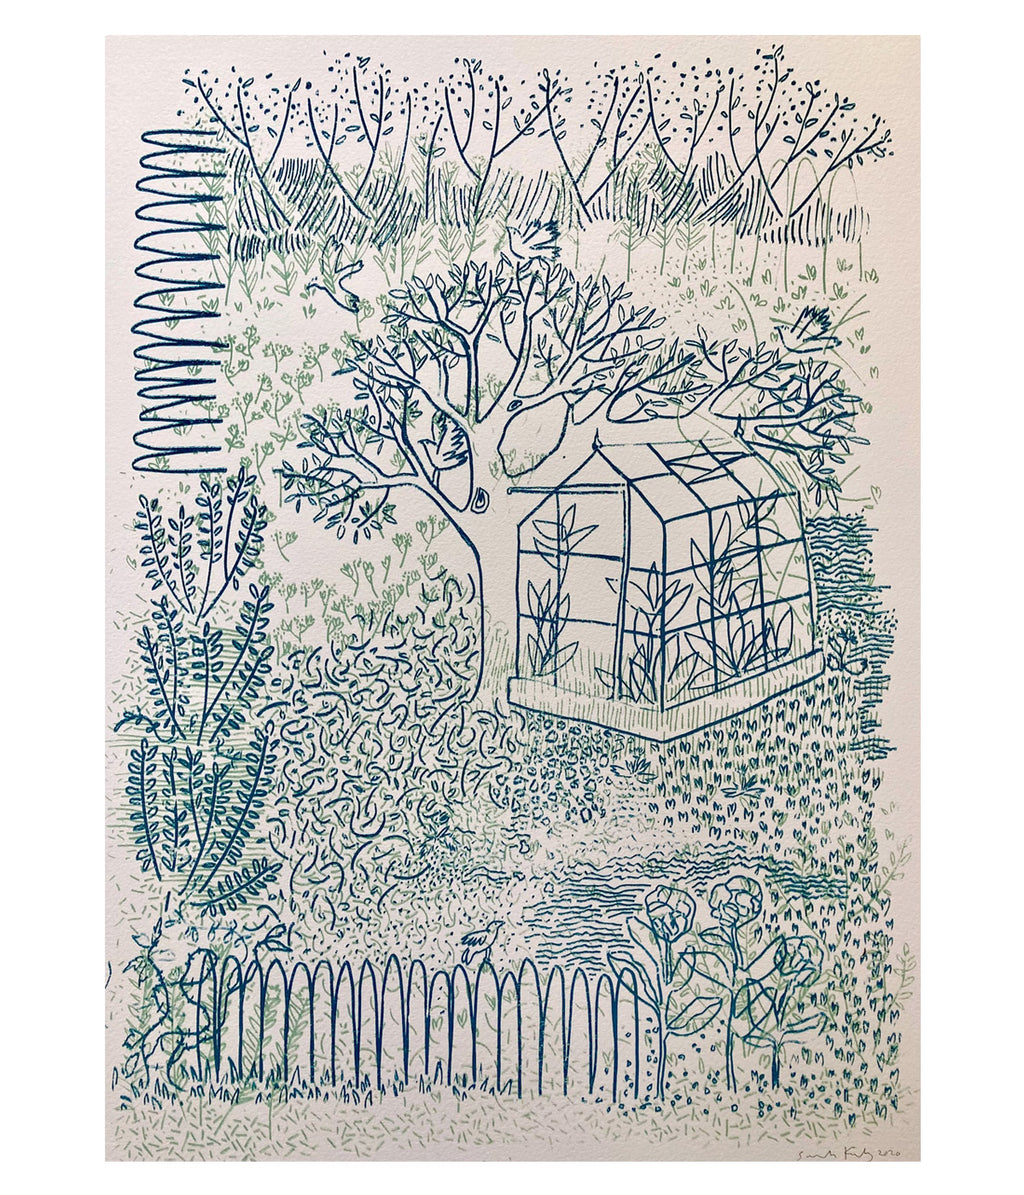 Another Plot, linocut print by Sarah Kirby